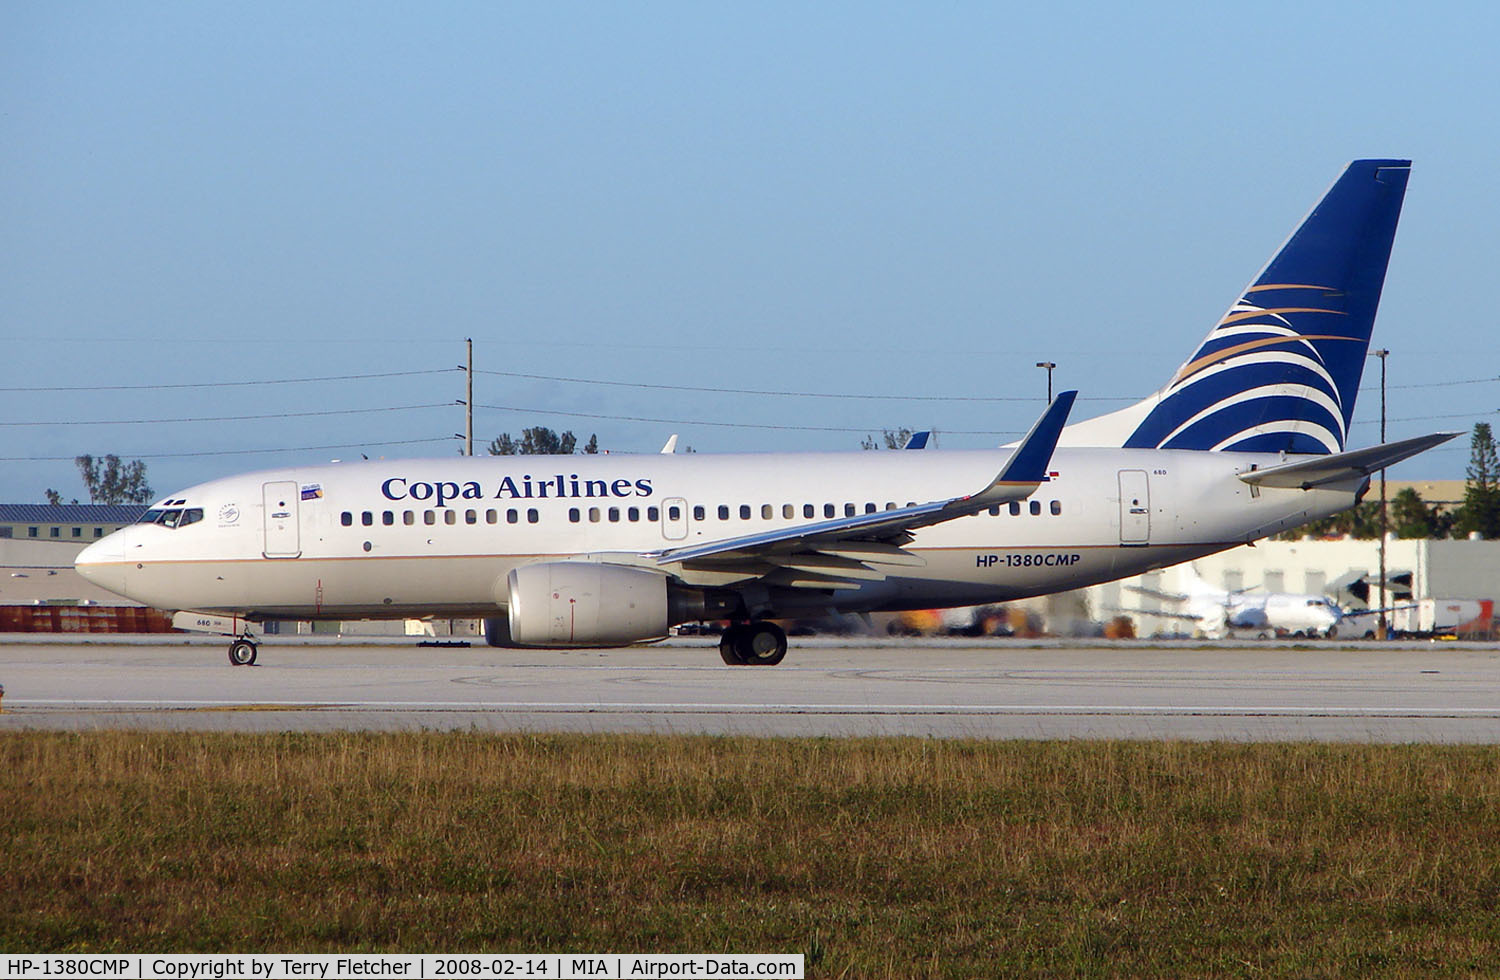 HP-1380CMP, 2002 Boeing 737-7V3 C/N 30464, Copa B737 about to depart Miami